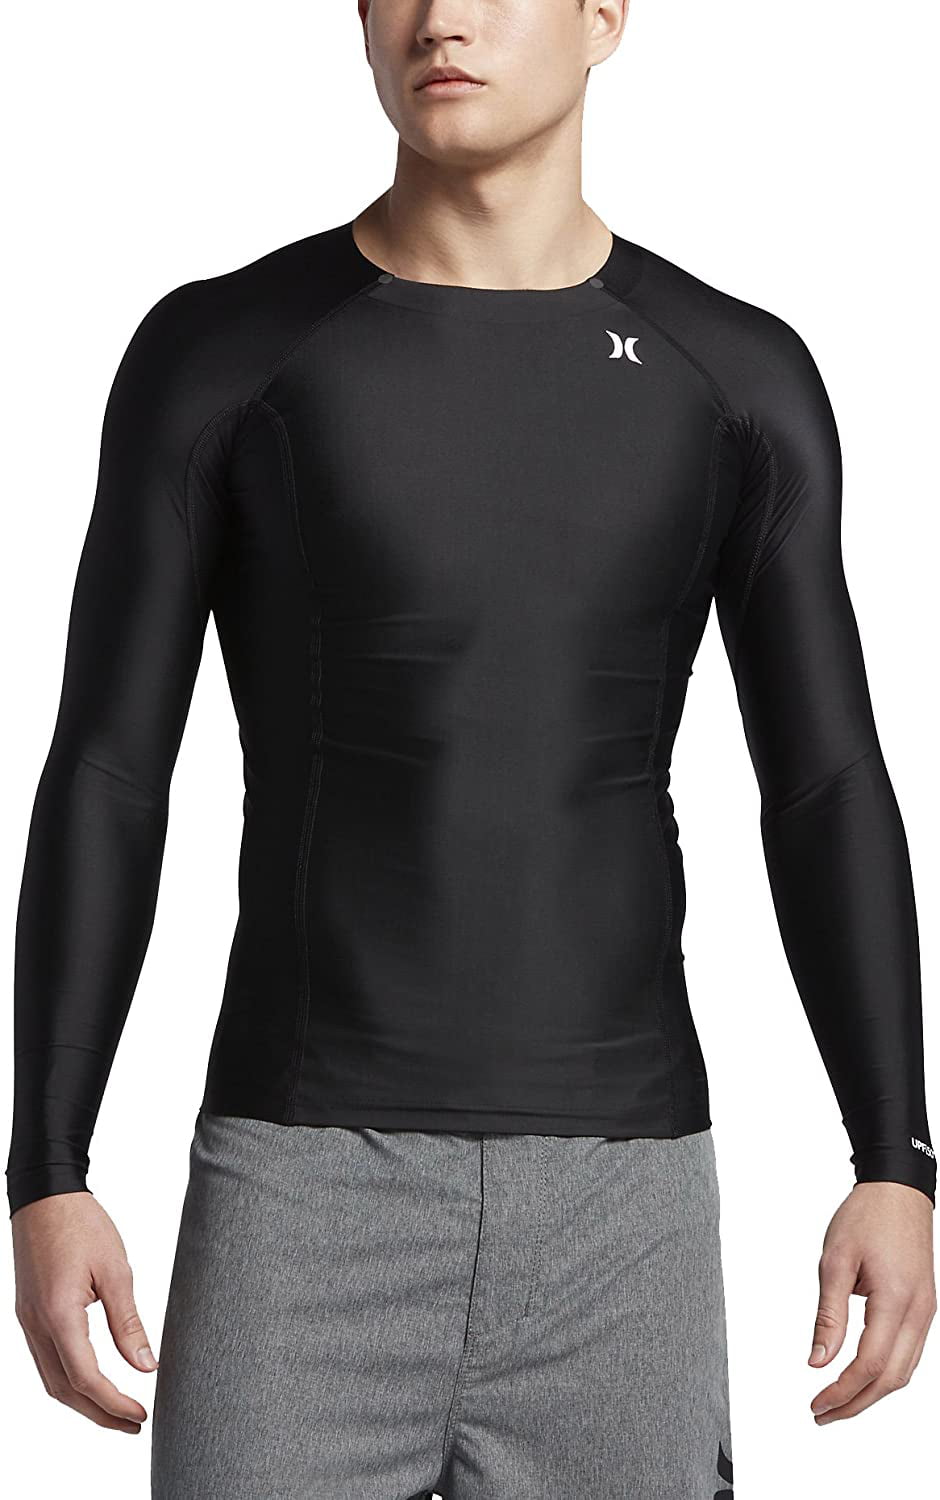 Details about   Hurley Pro Max Men's Long-Sleeve Surf Top Black Mens Small MSRP $70 